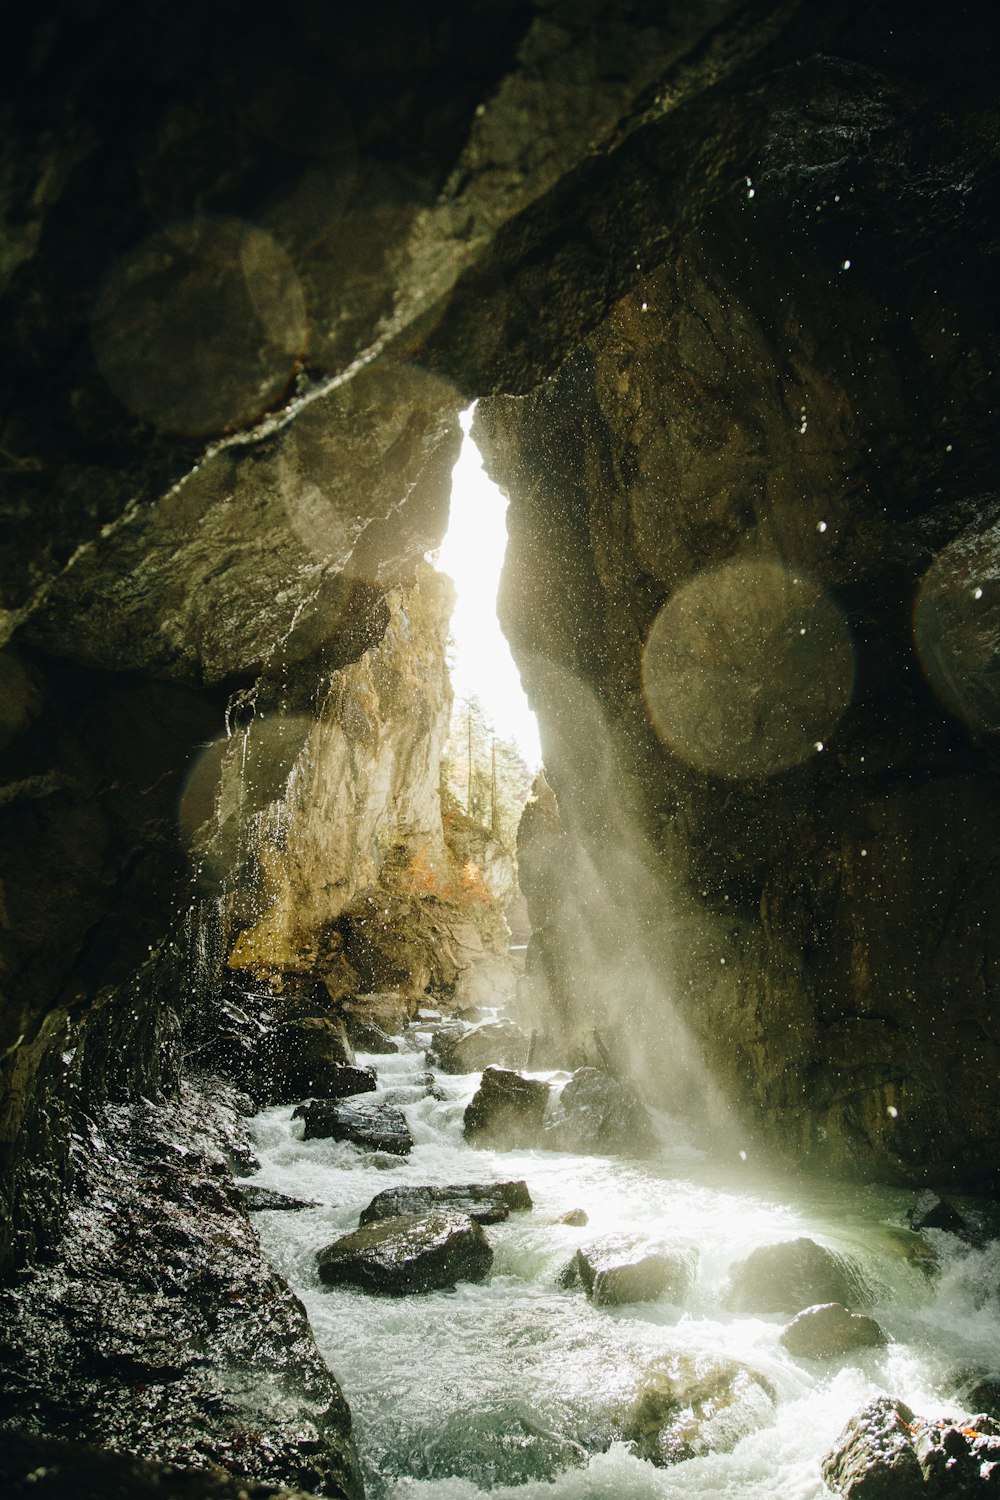 a stream running through a cave filled with rocks